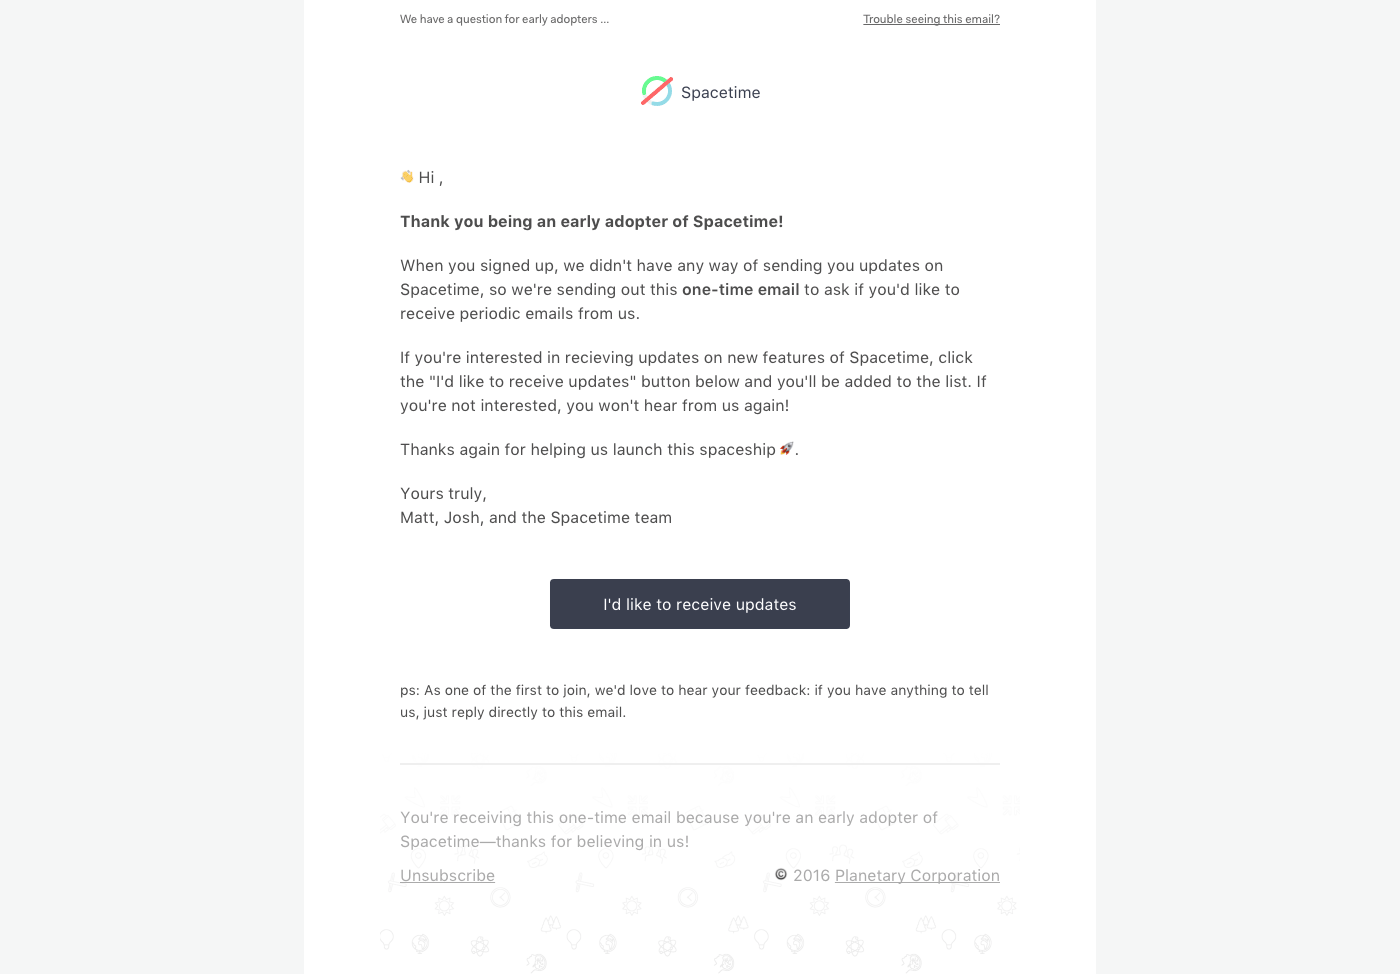 The first email we sent to users.